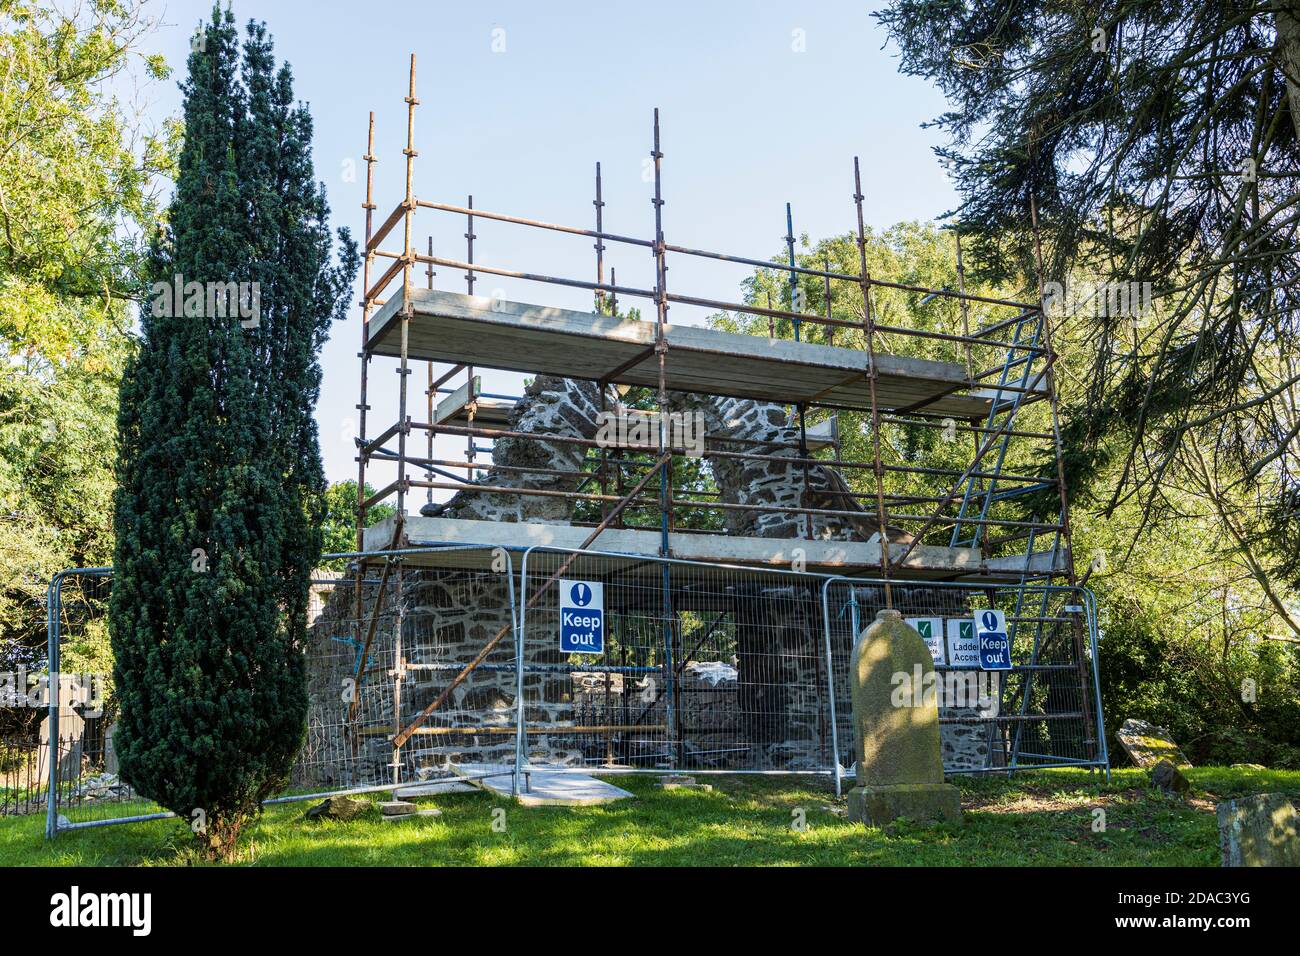 Scaffolding around the arch of a medieval ruin, old church and graveyard in Johnstown, County Kildare, Ireland Stock Photo